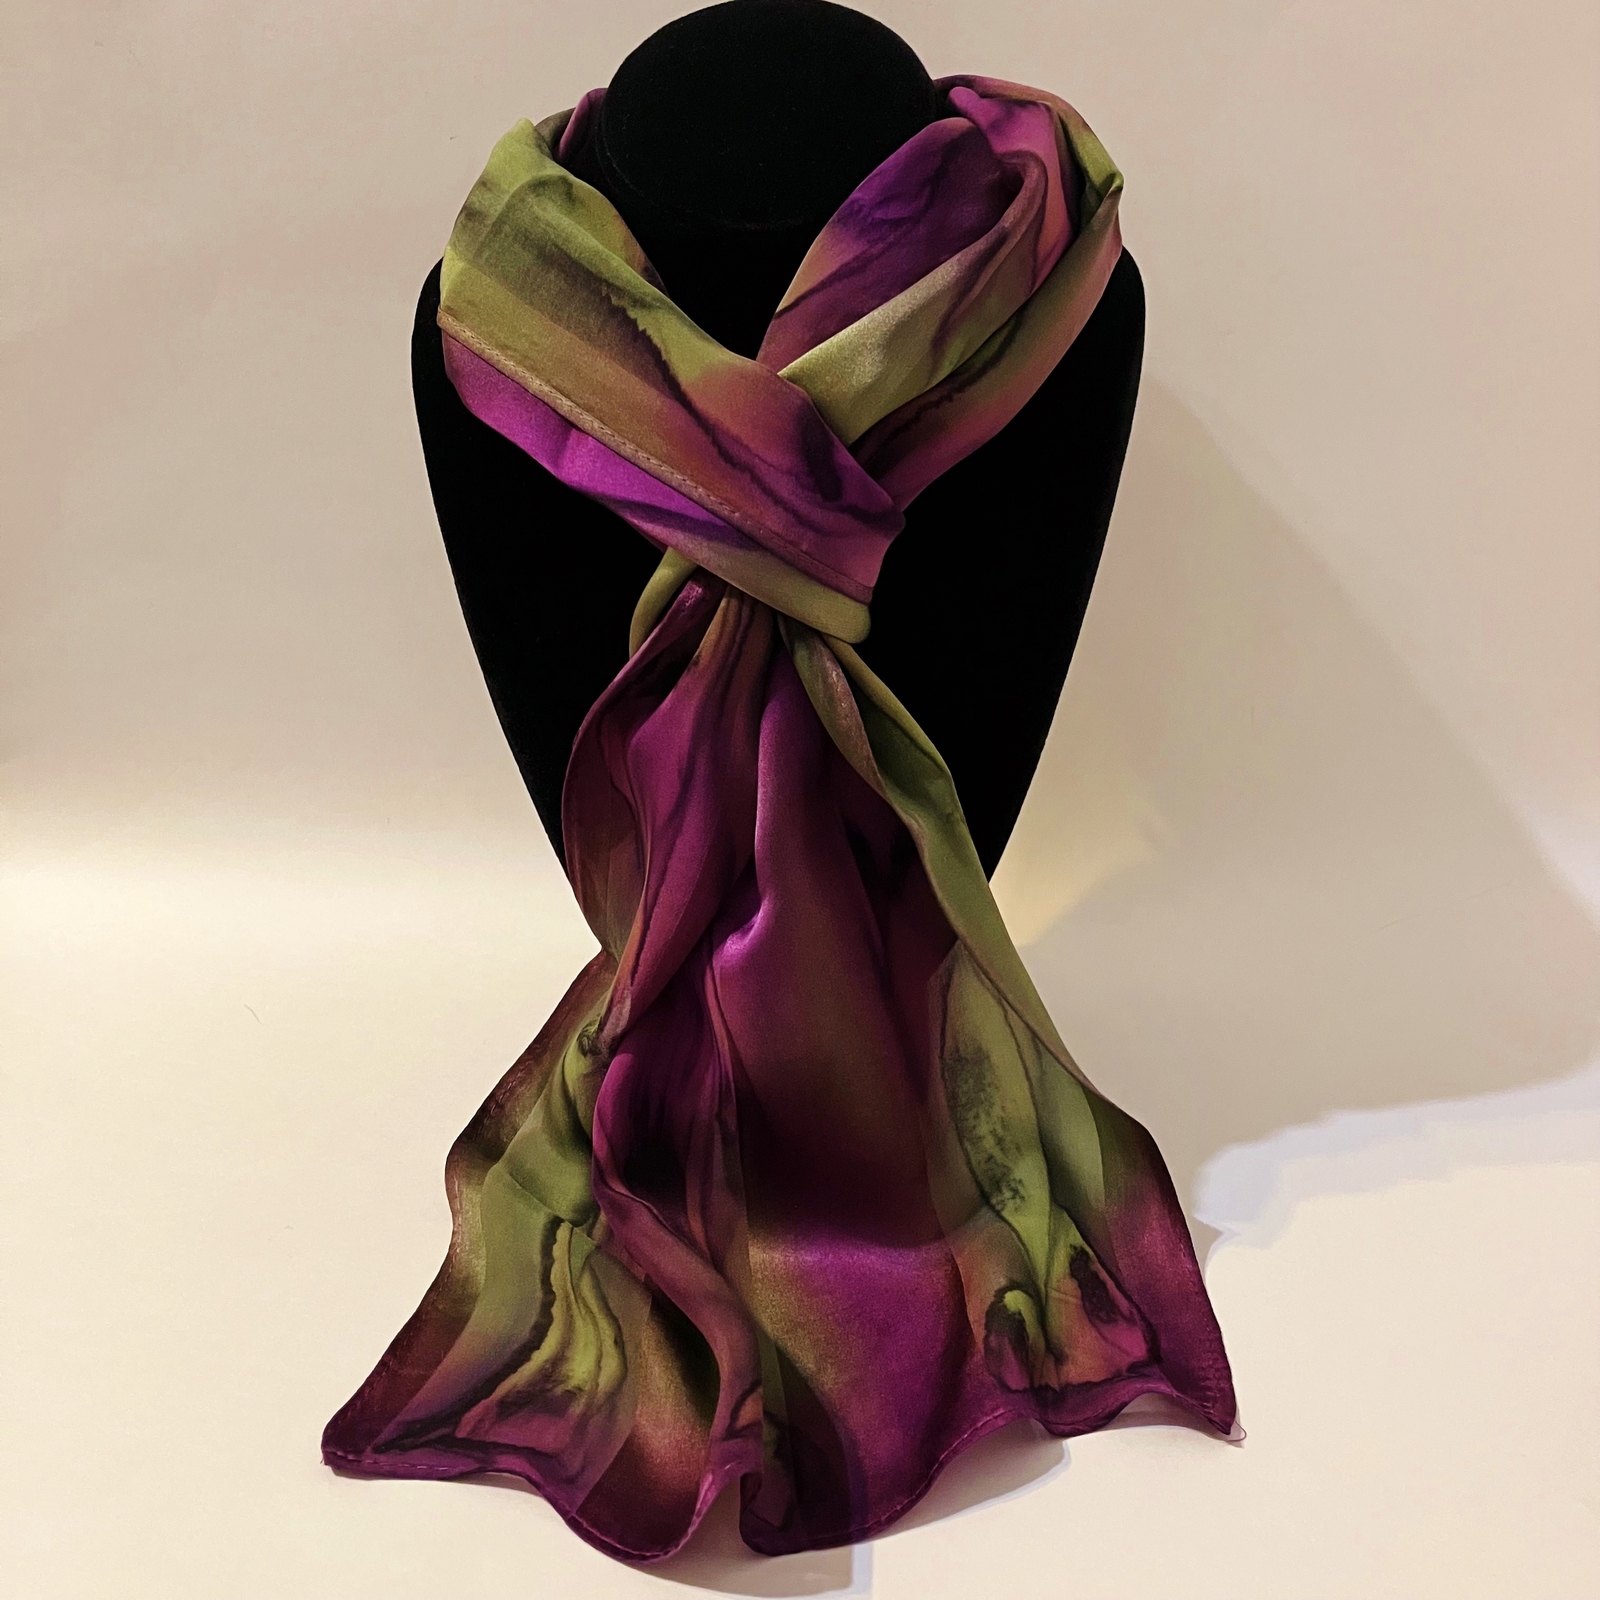 Primary image for Hand Painted Silk Scarf Fuchsia Purple Avocado Green Neck Head Unique Gift New